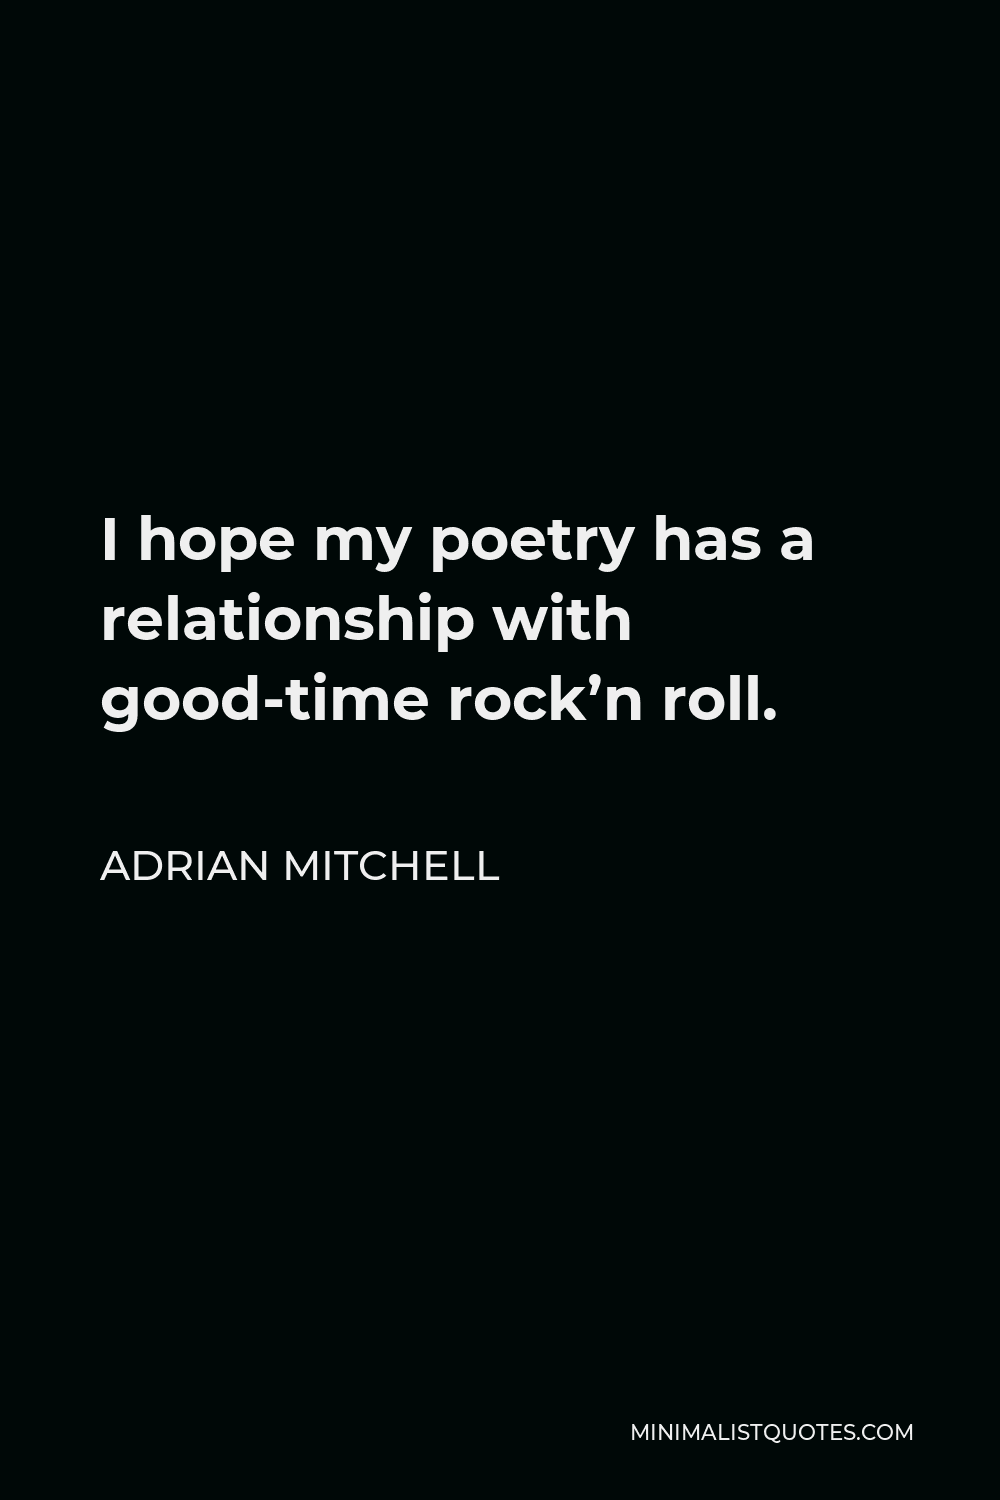 Adrian Mitchell Quote - I hope my poetry has a relationship with good-time rock’n roll.